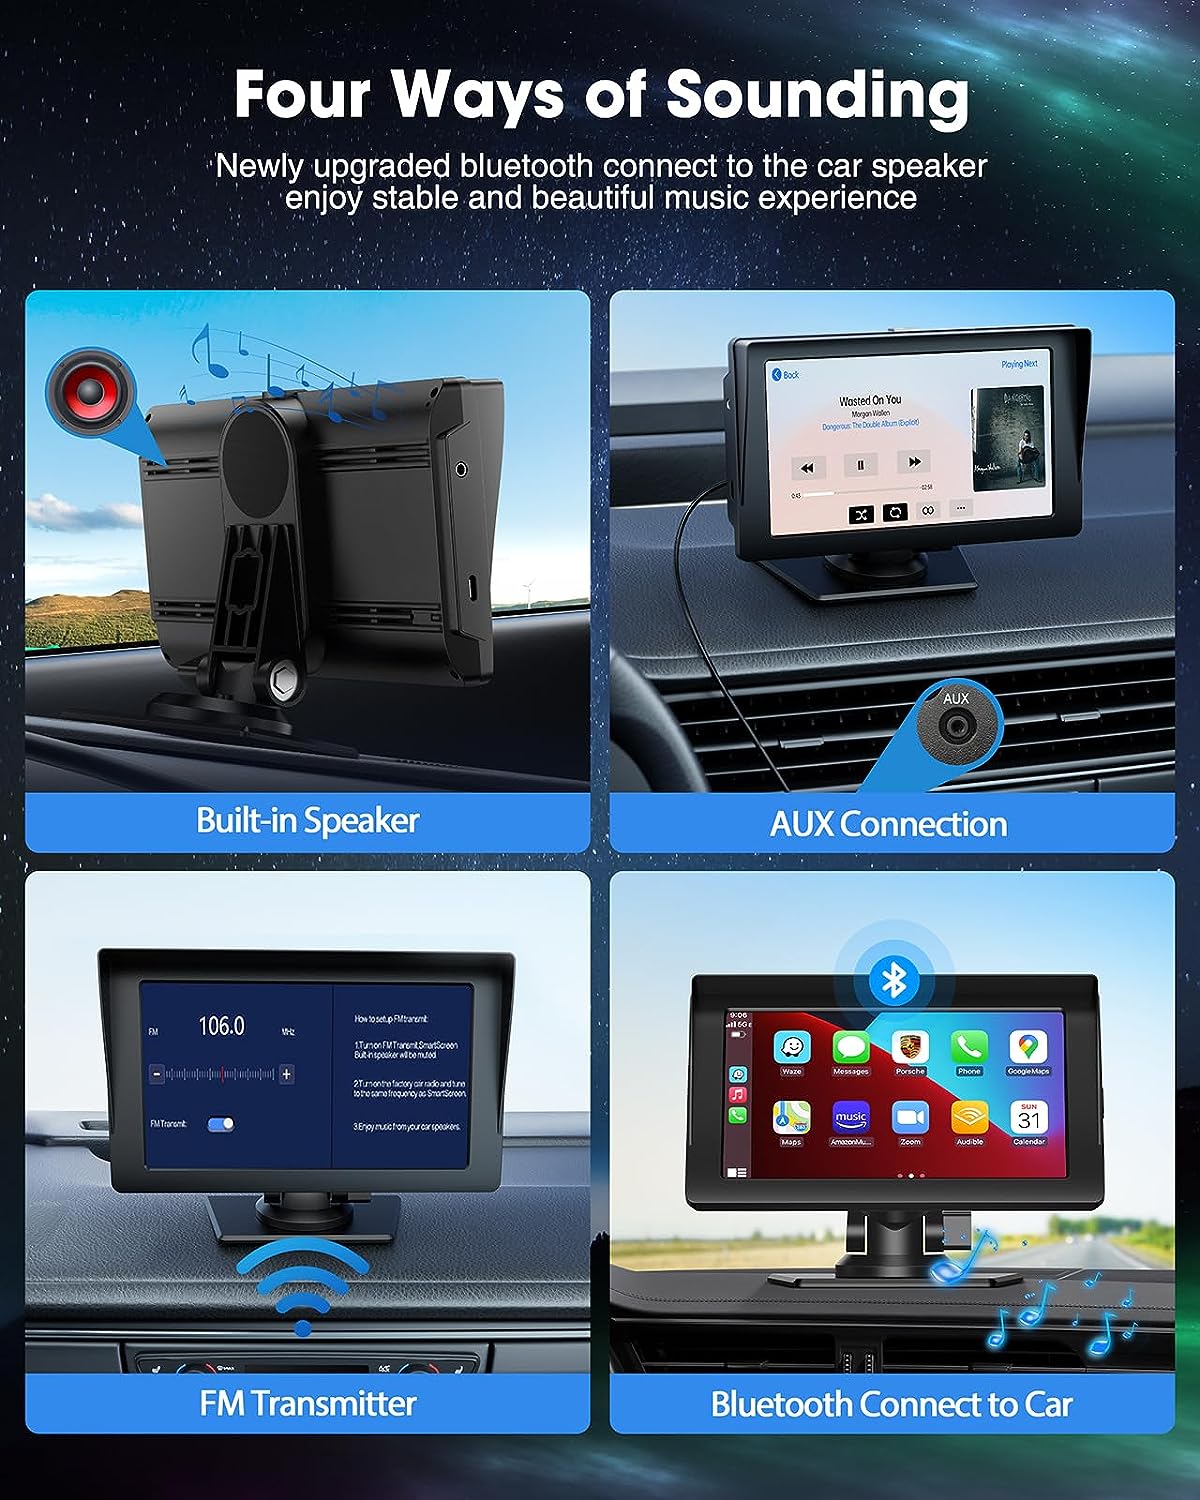 Portable 7 Inch Portable Wireless Car Stereo with Apple Carplay,1080P Reverse Camera, GPS Navigation, Airplay,Android Auto,Bluetooth,FM, Siri